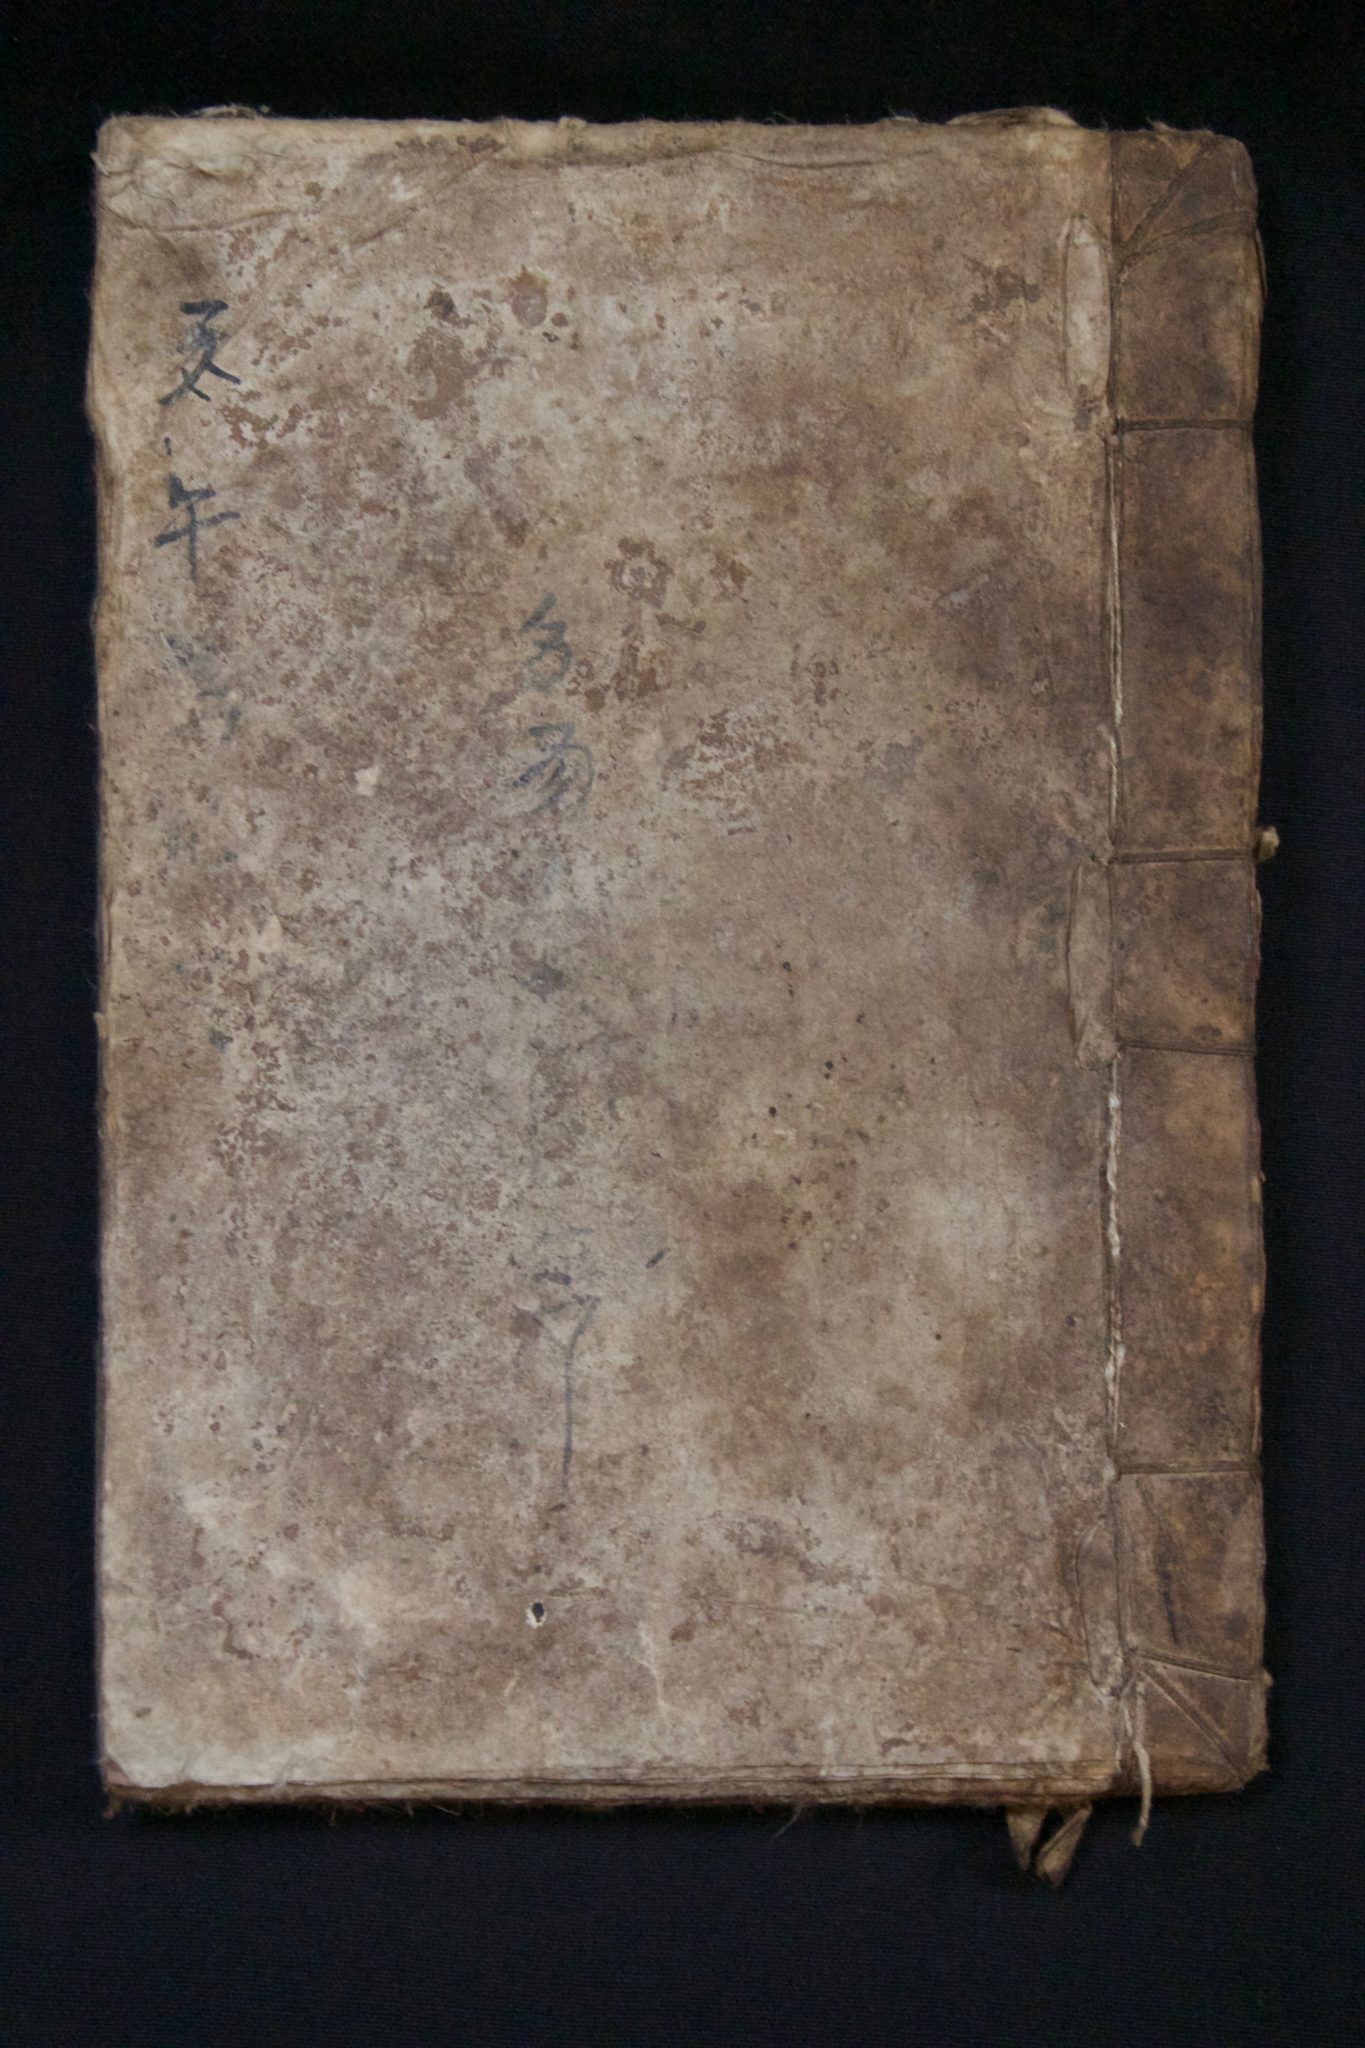 Shaman's Personal Instructional Book, China, Yunnan Shui people, Early 20th c, Paper, ink, pigment, Scripted by the shaman, on handmade paper, to record all his knowledge and to instruct future shaman, 9” x 6 ¼” 1”, $750.